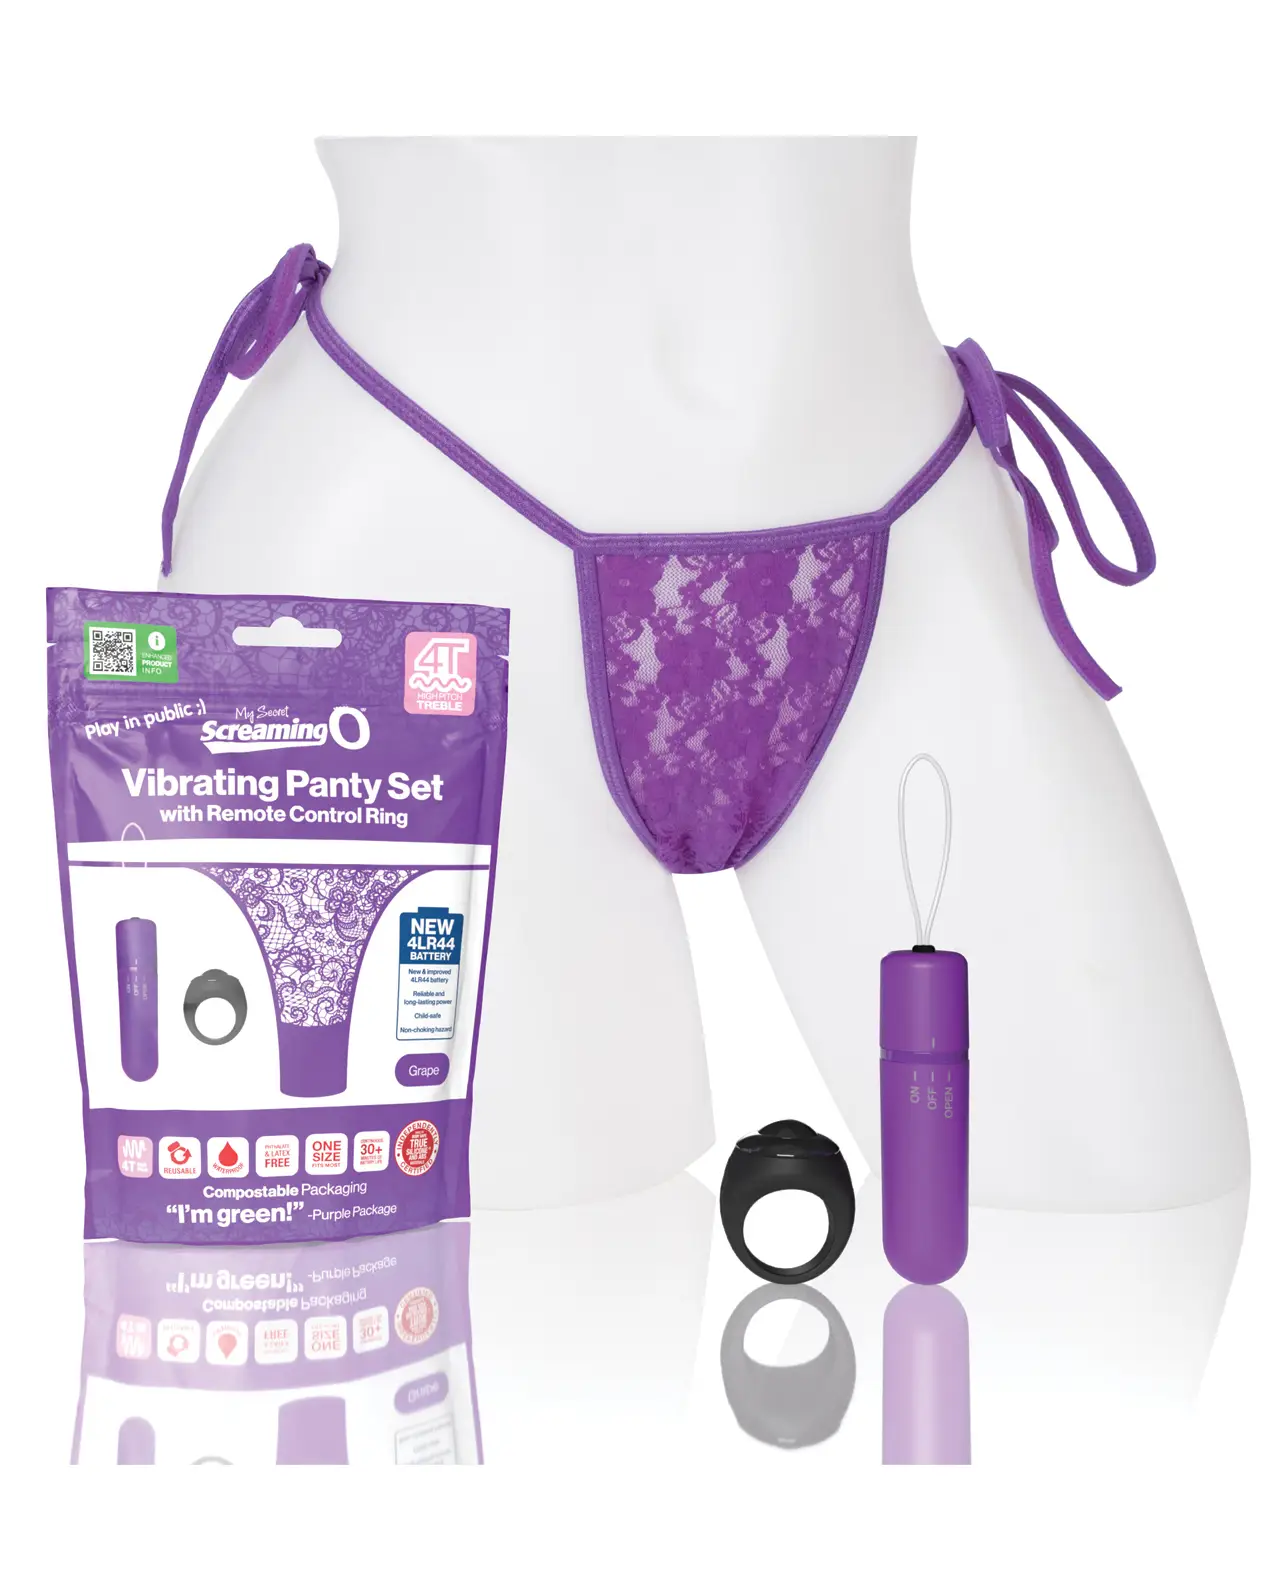 A mannequin body wearing the vibrating panties in Grape